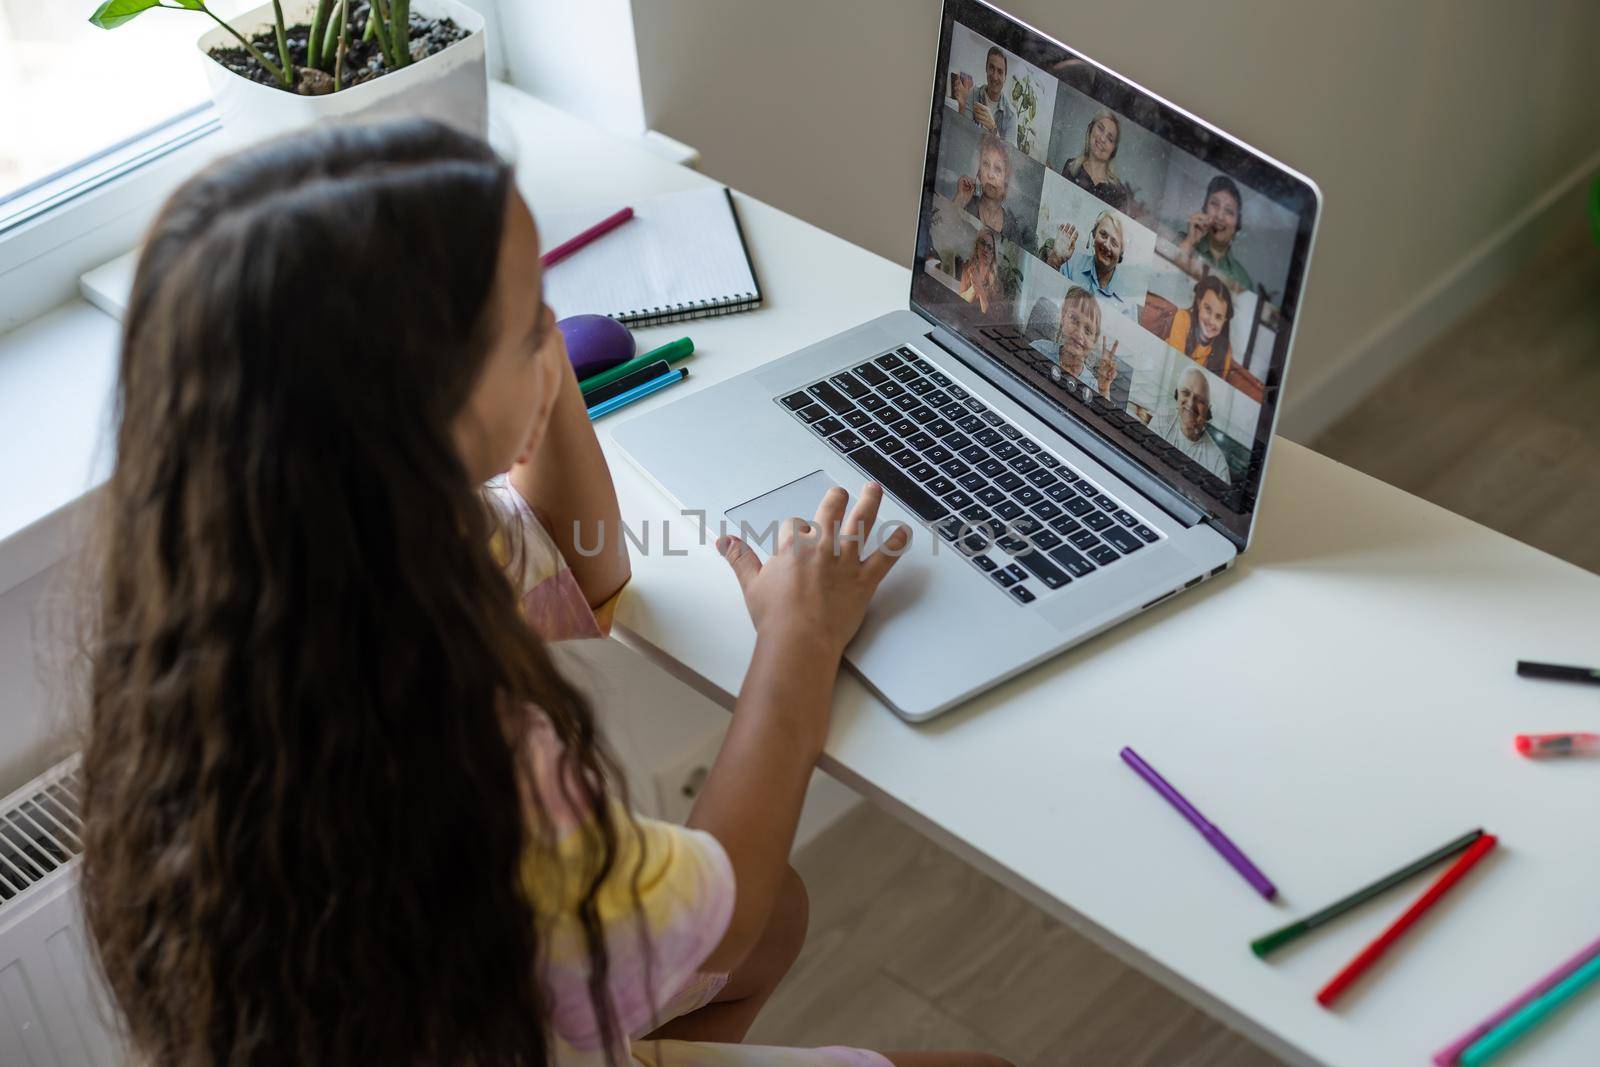 Home schooling. A girl is sitting at a table with a laptop during an online video chat of a school lesson with a teacher and class. Concept of distance education. Self-isolation in quarantine